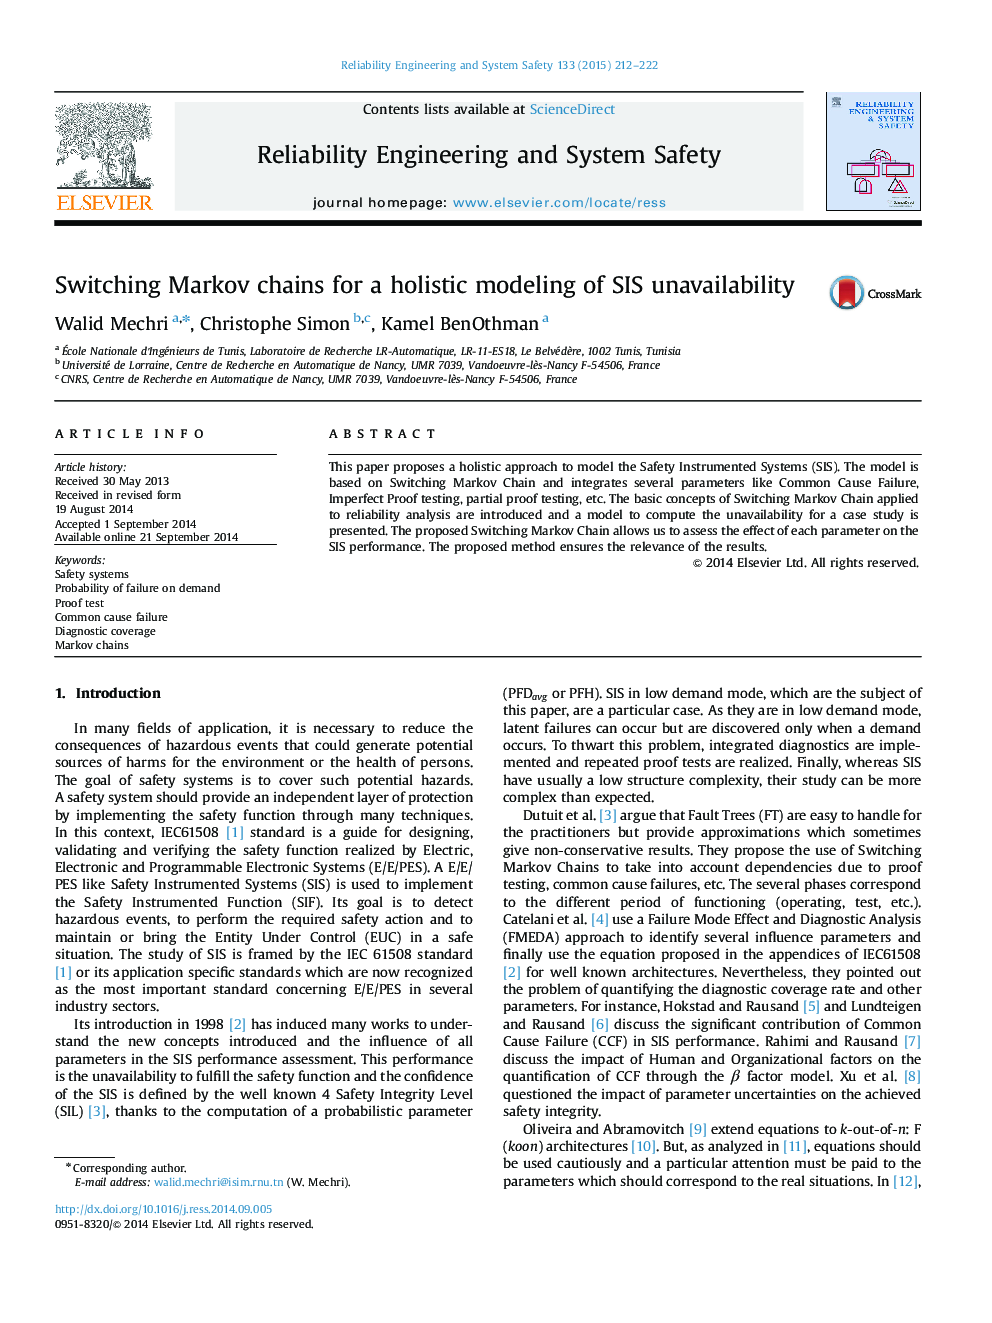 Switching Markov chains for a holistic modeling of SIS unavailability